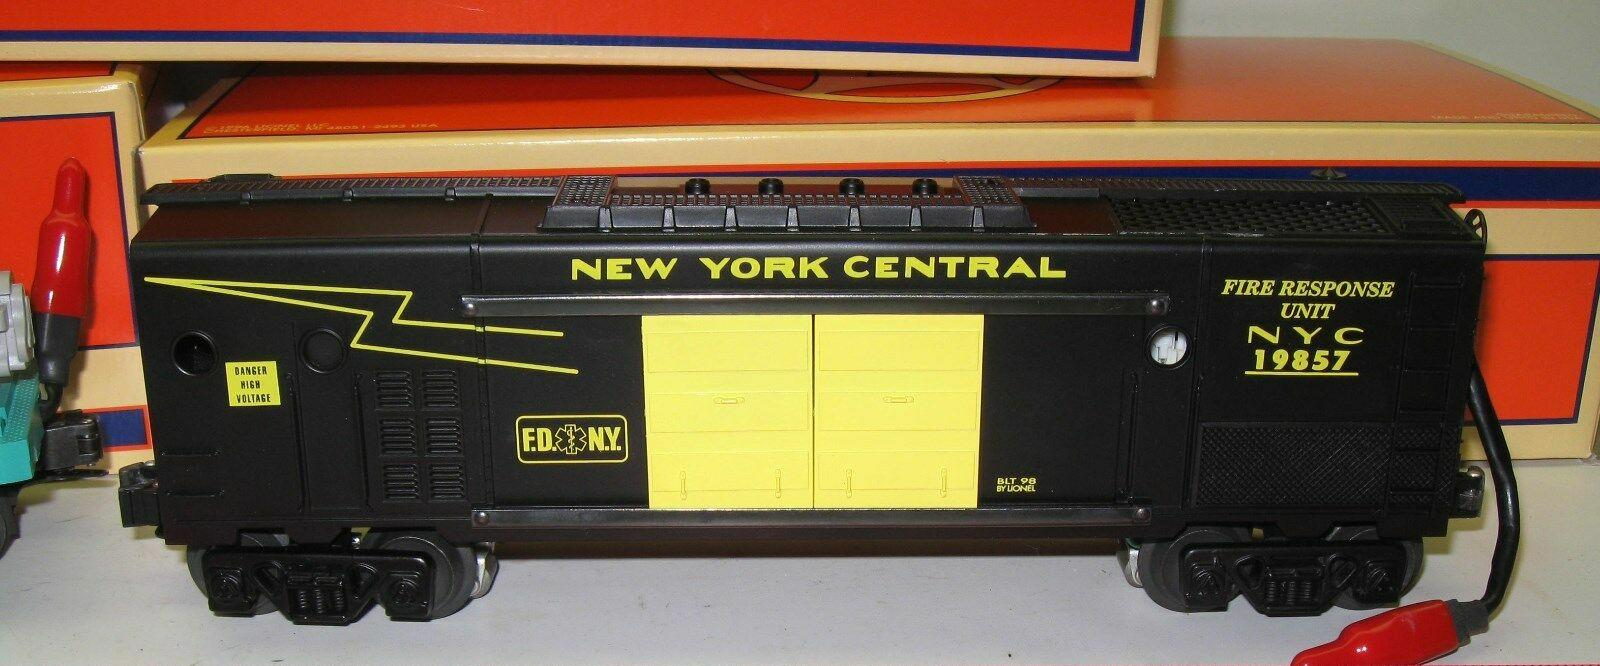 New York Central Instruction Car image